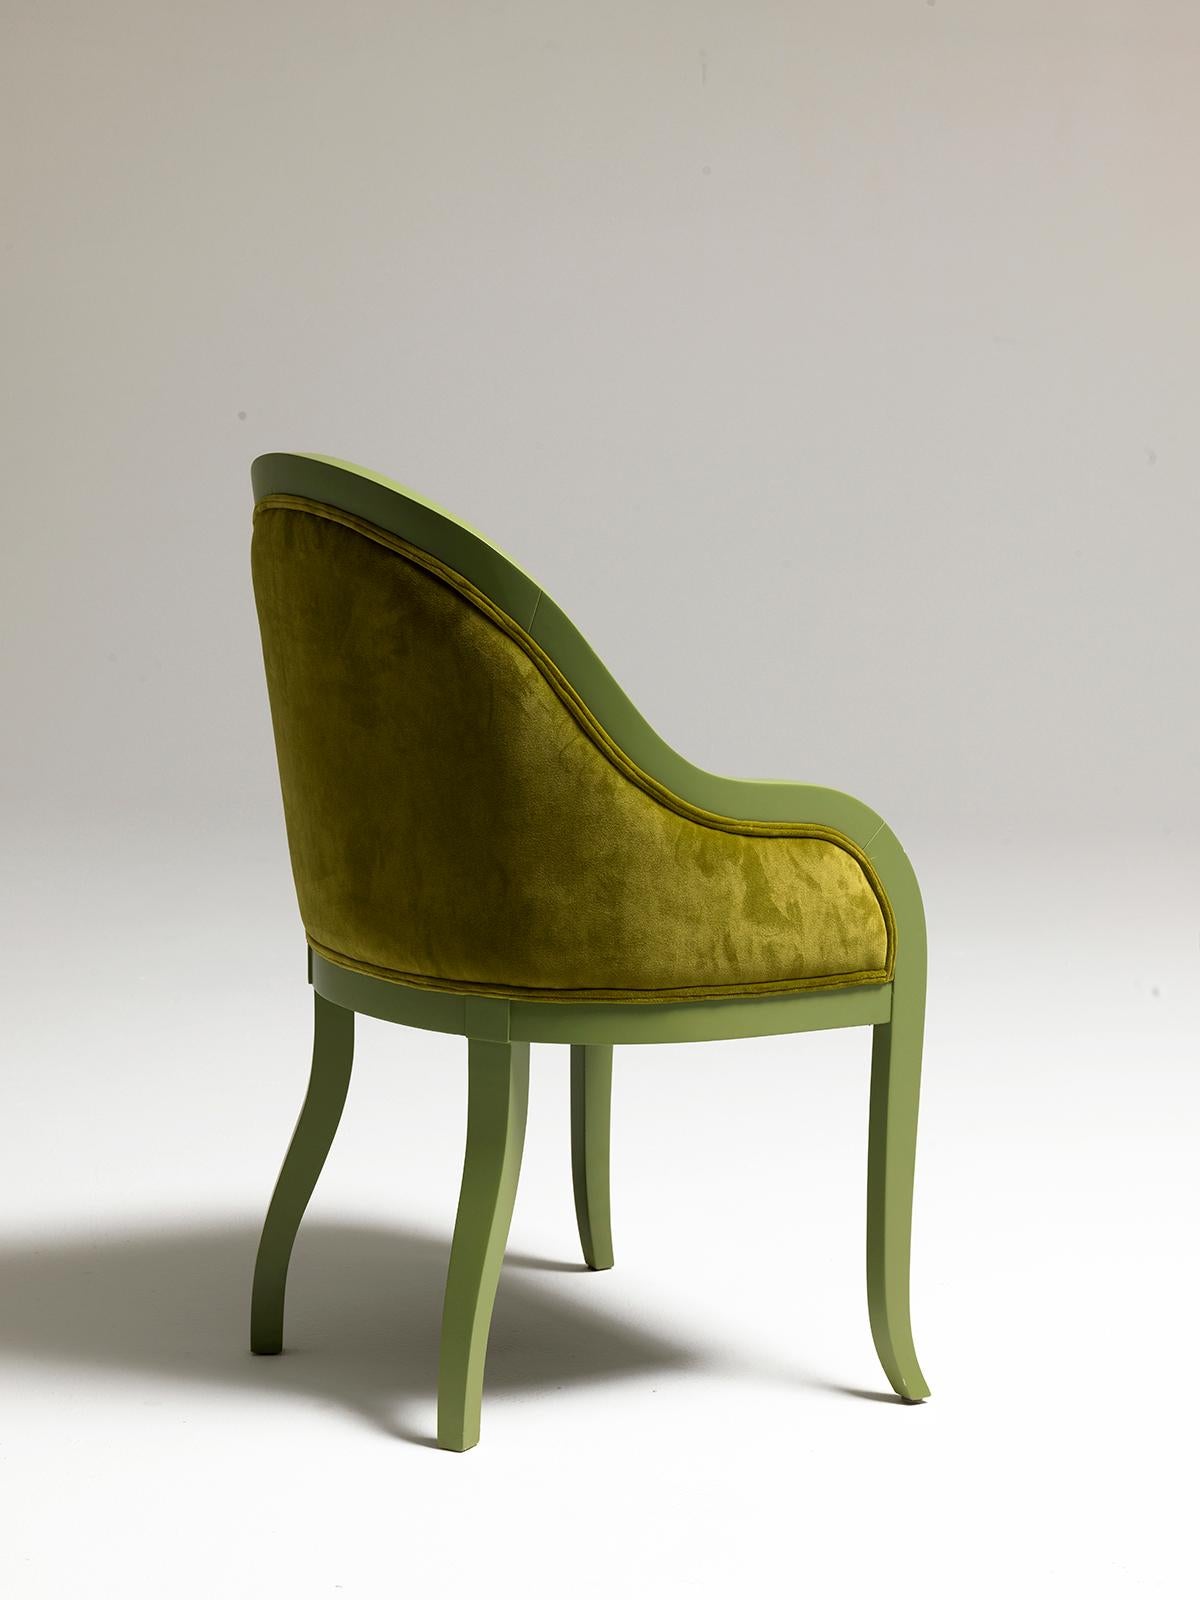 Modern Petunia Armchair in Green Lacquered Wood and Velvet Upholstery by Aldo Cibic